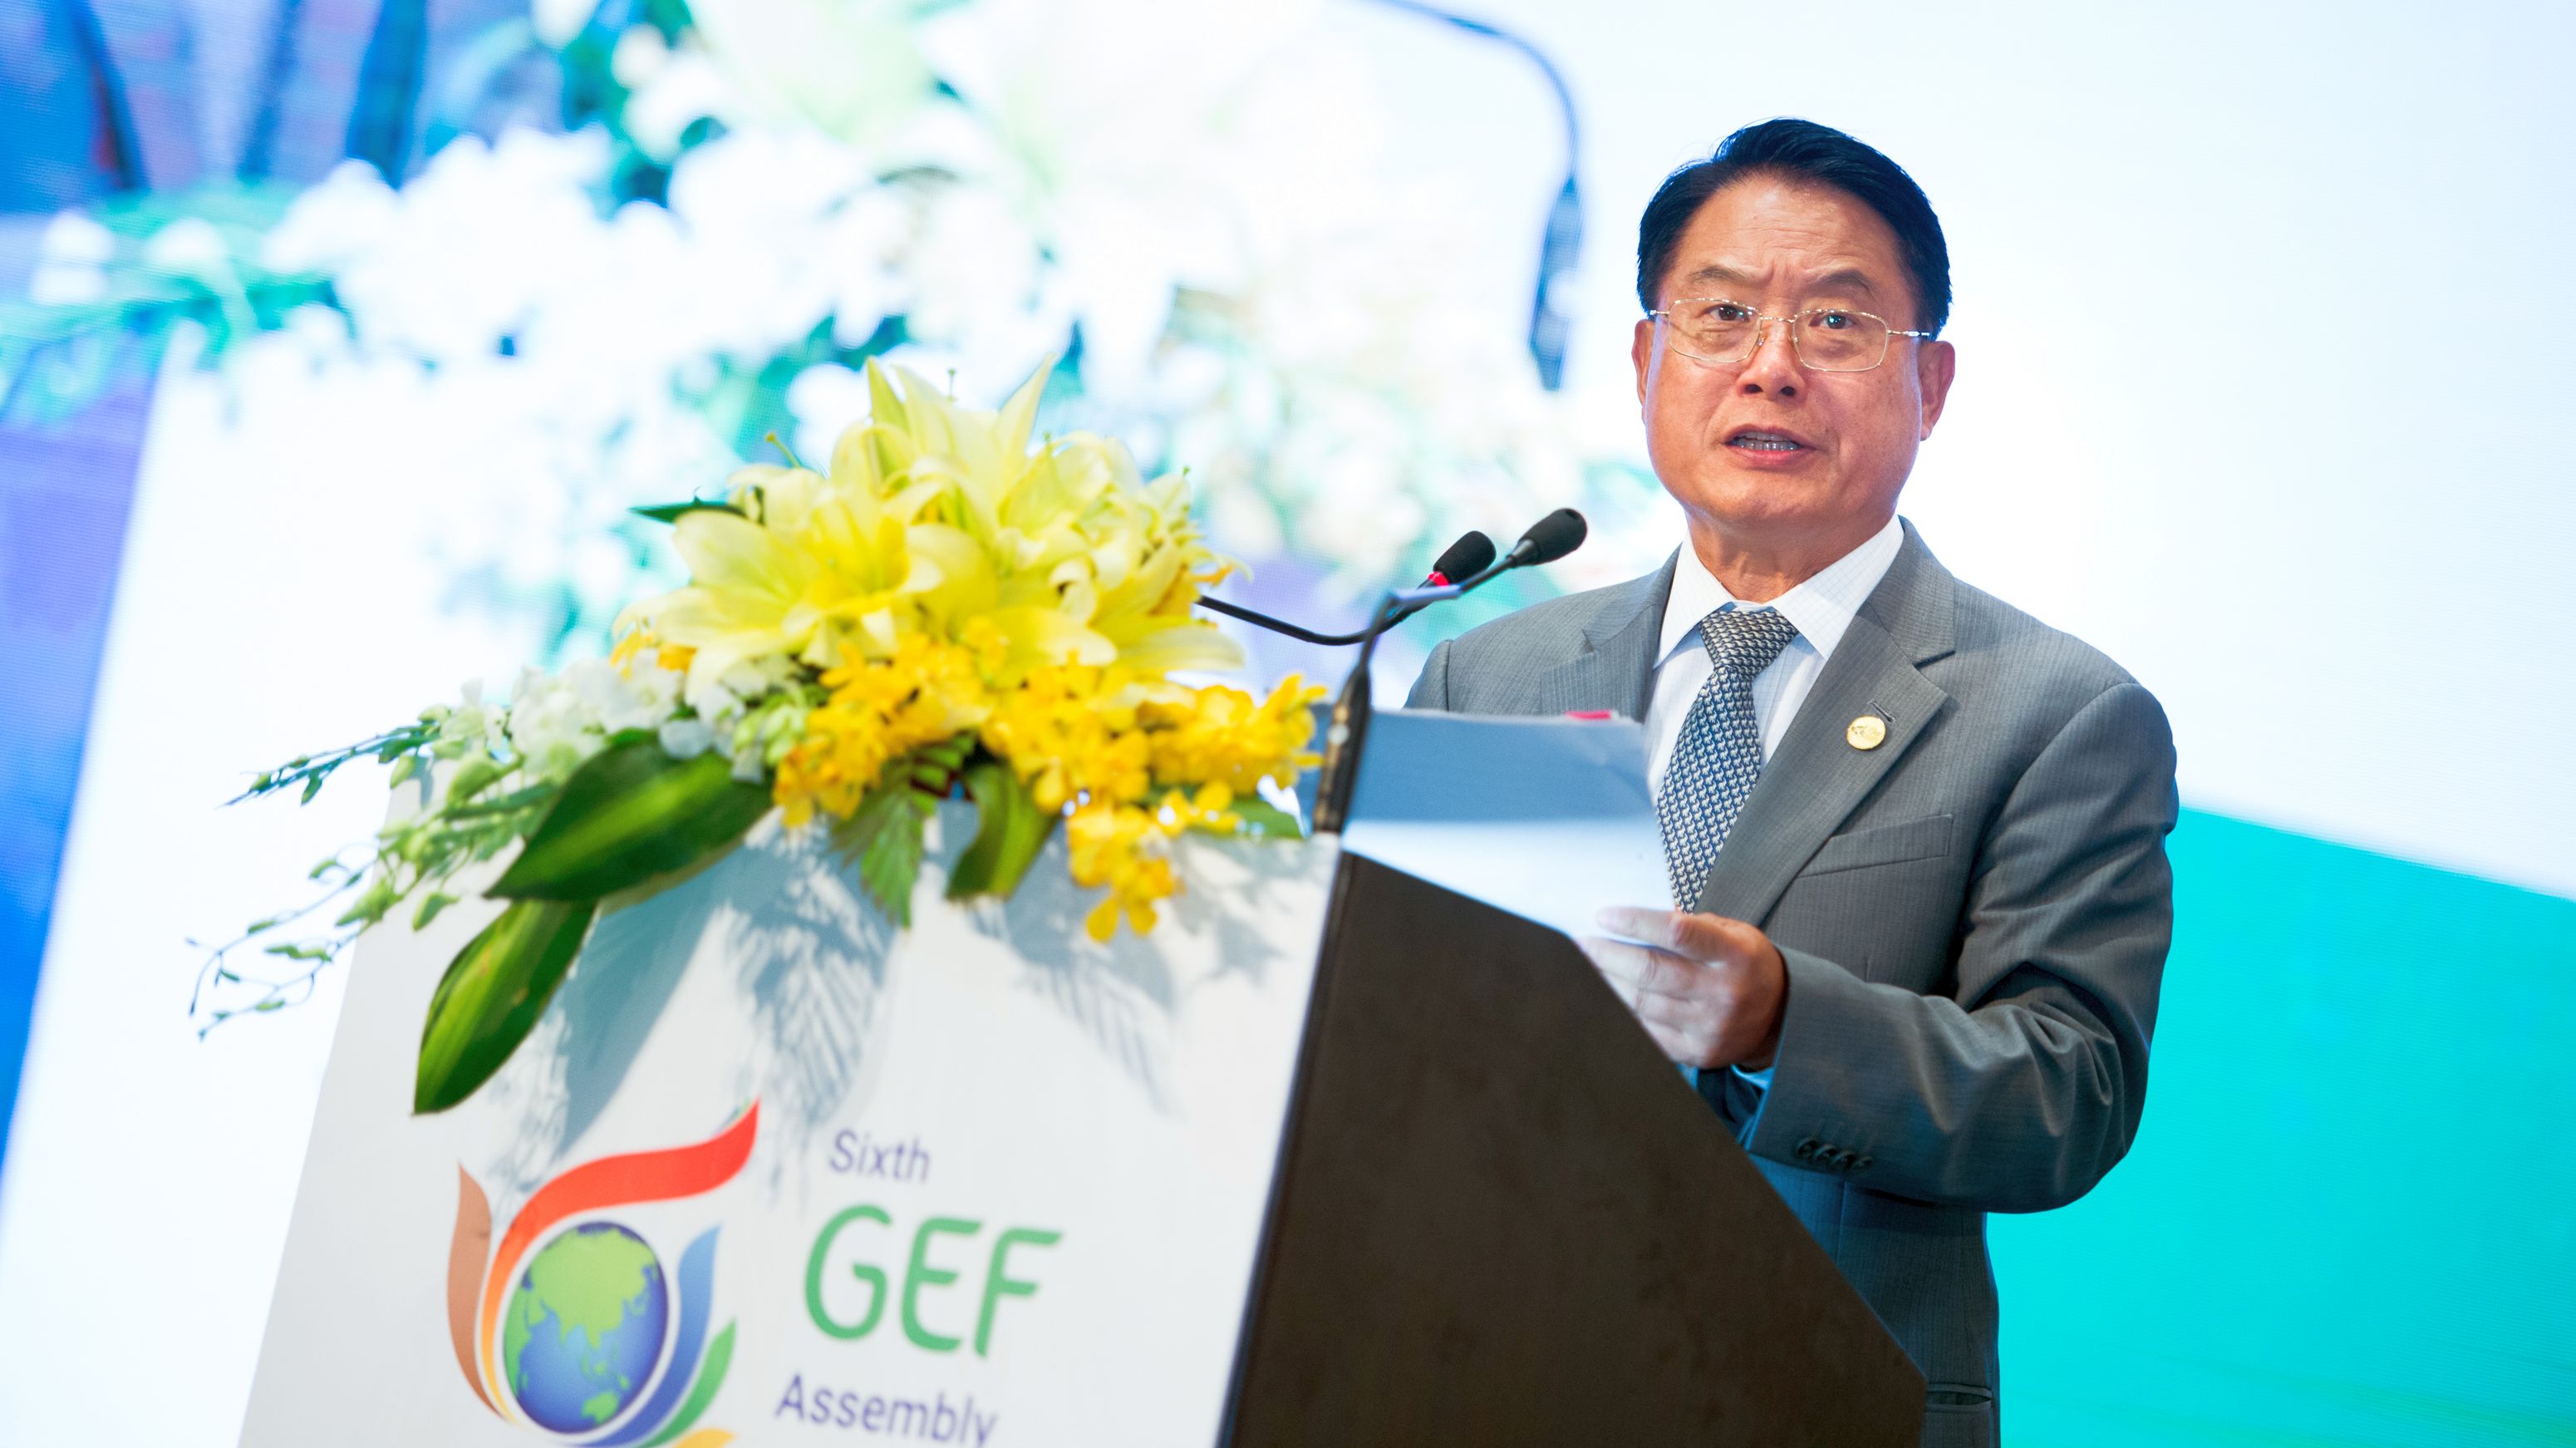 UNIDO shows strong participation at the Sixth GEF Assembly